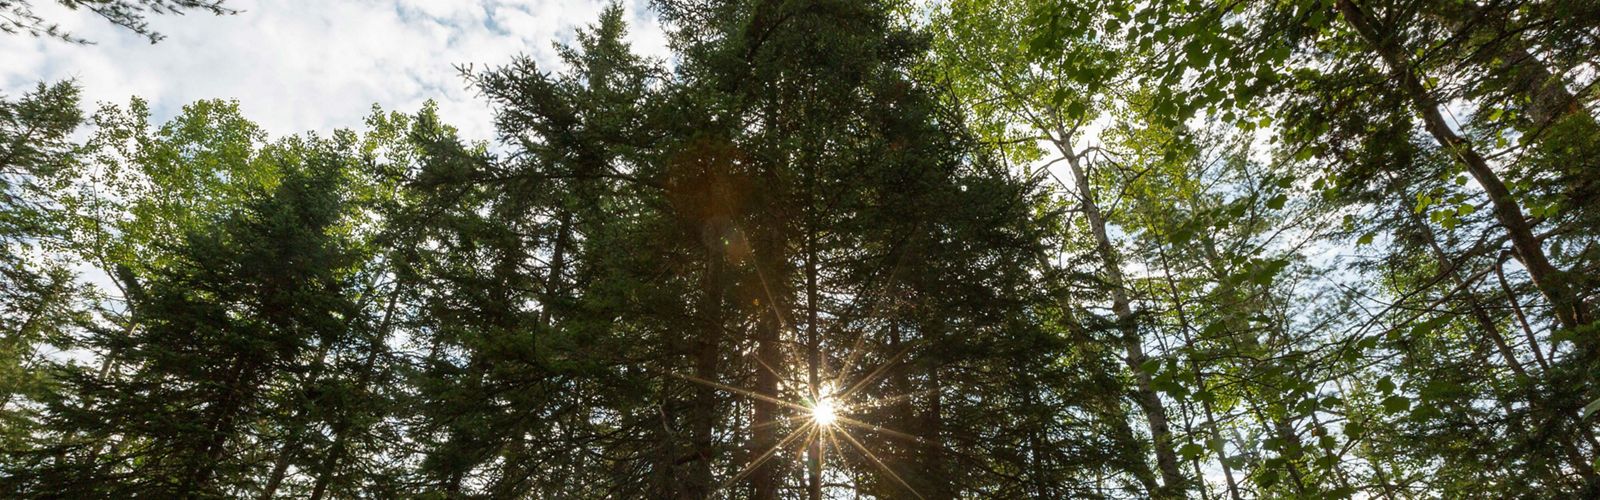 Sunlight shining through a stand of tall trees.